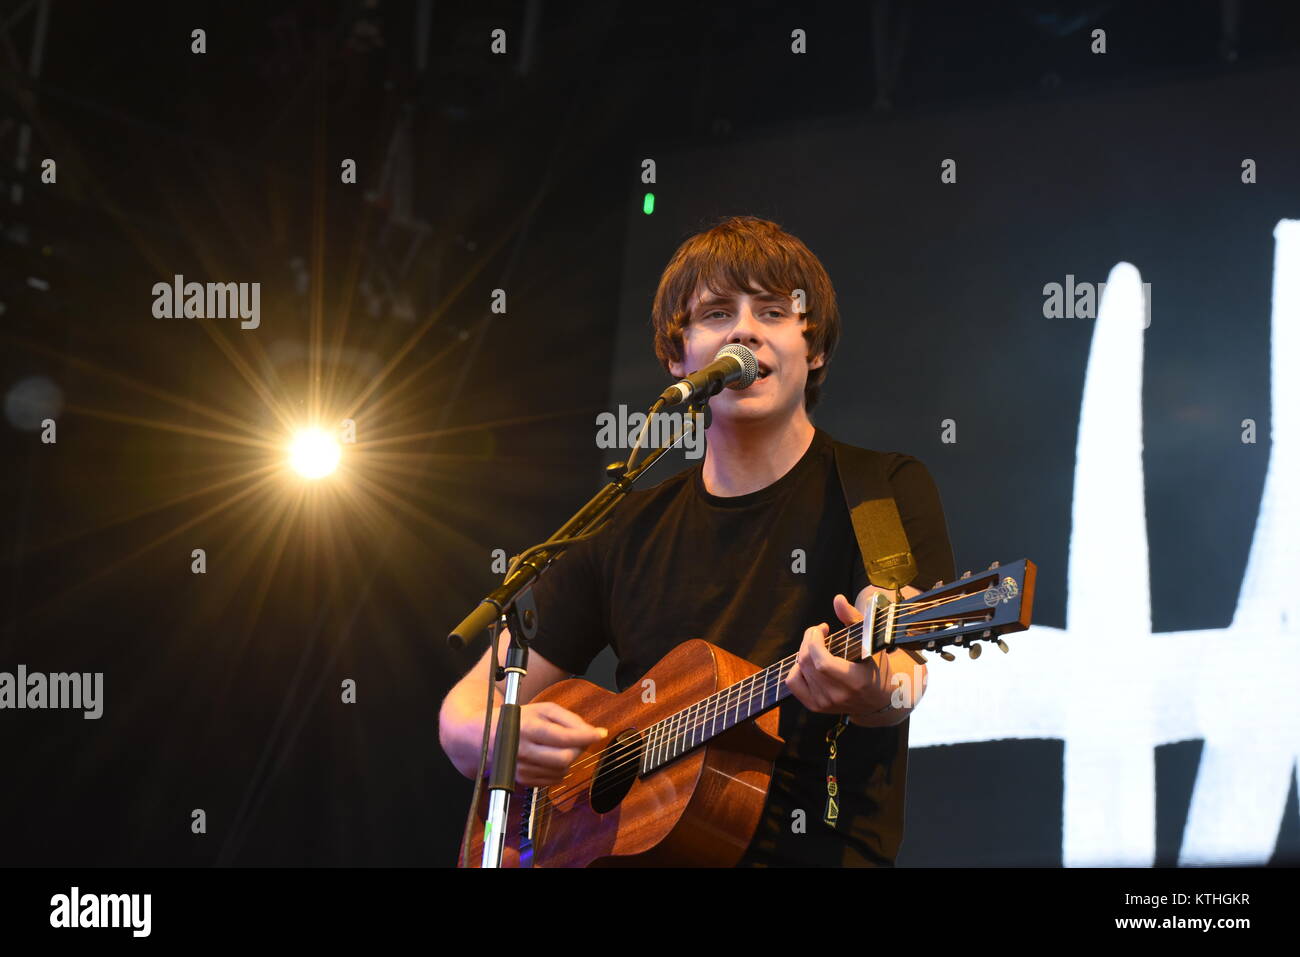 Slovakia, Trencin – July 8, 2017. Jake Bugg, English musician, singer, and songwriter, performing live at Pohoda open-air music and arts festival. Stock Photo